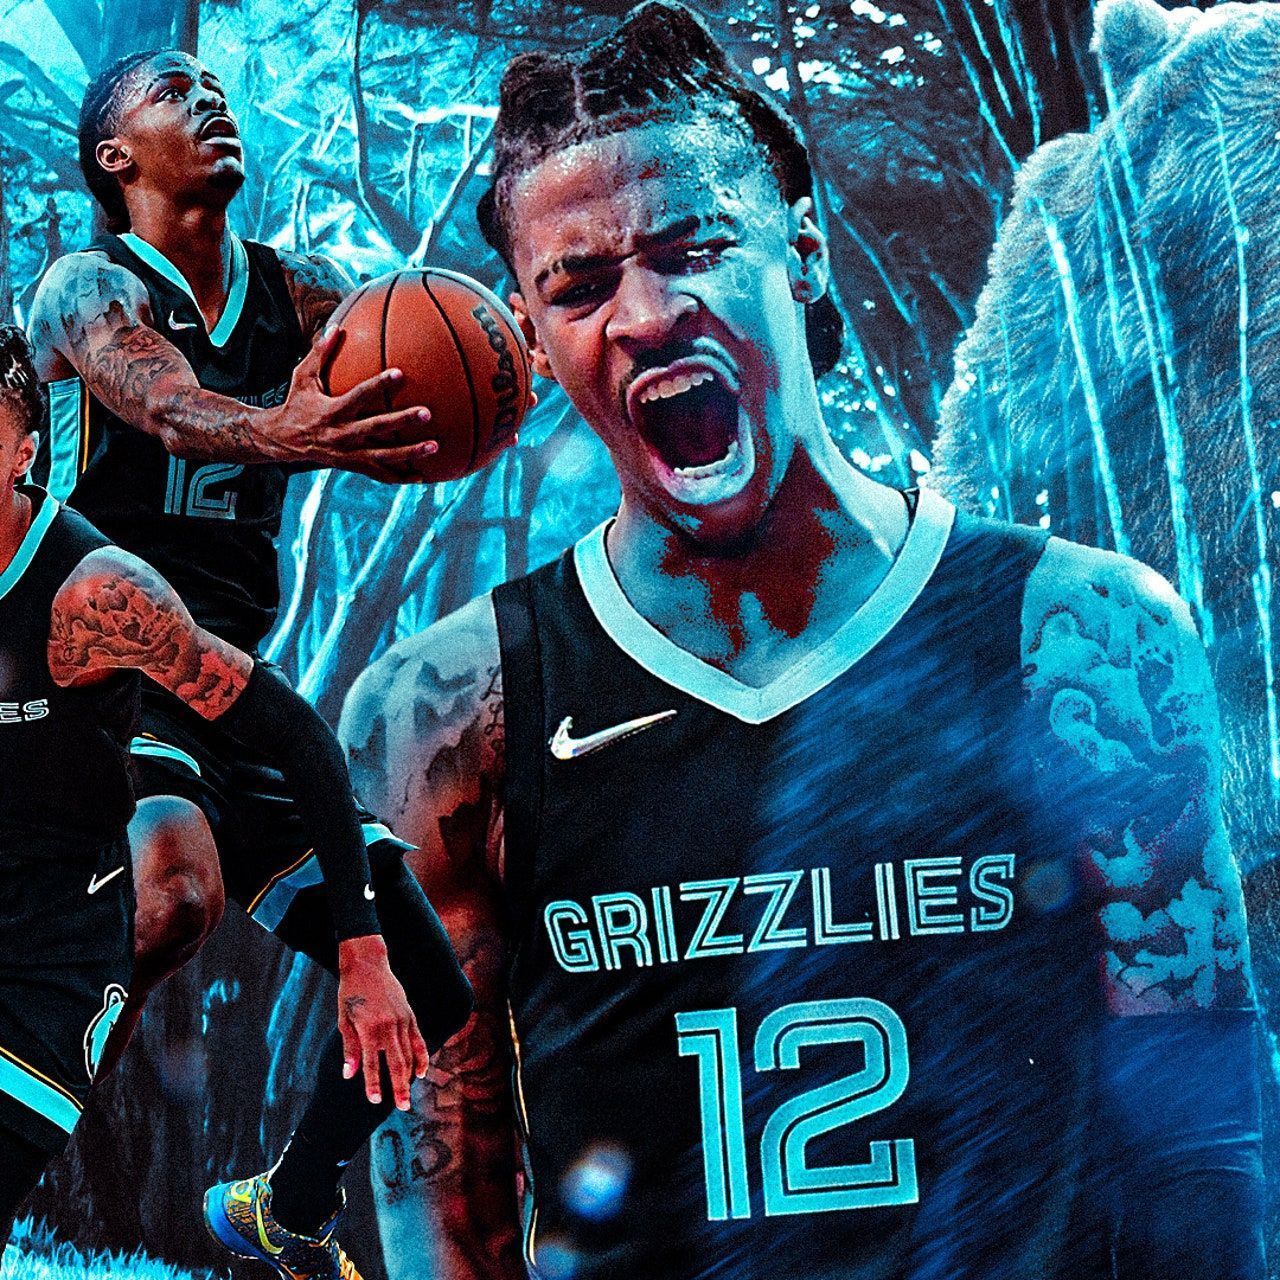 A graphic of the Grizzlies basketball team with a blue and black color scheme. - Ja Morant